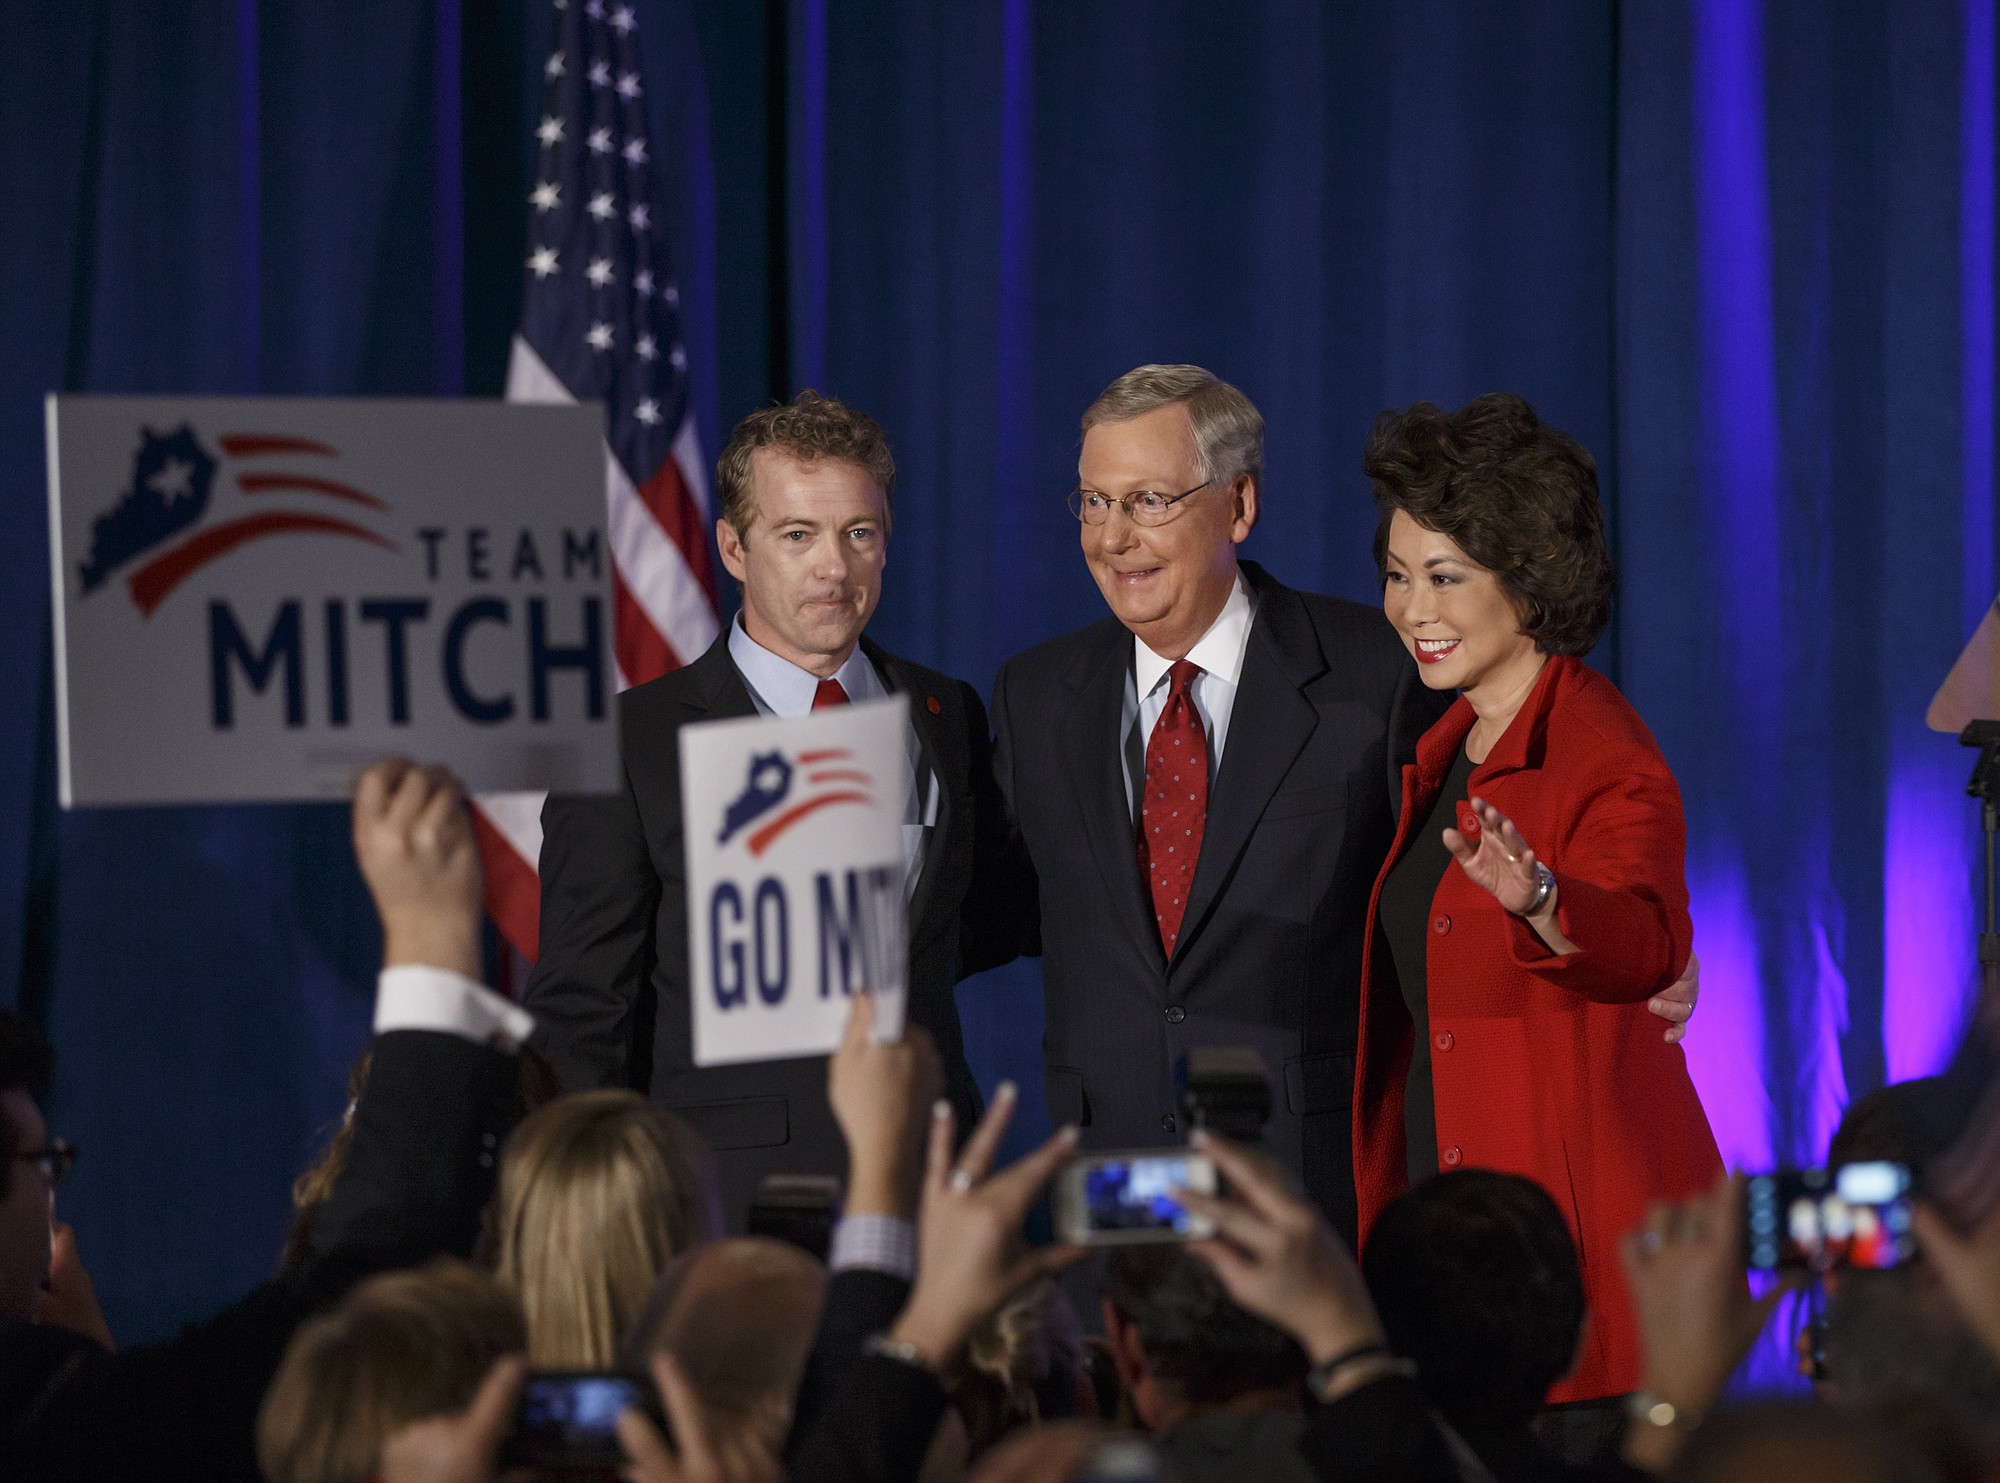 Senate Minority Leader Mitch McConnell, R-Ky., center, celebrates Tuesday with Sen. Rand Paul, R-Ky., left, and his wife, former Labor Secretary Elaine Chao, at an election night party in Louisville, Ky.. McConnell won a sixth term in Washington, with his eyes on the larger prize of GOP control of the Senate. . (AP Photo/J.